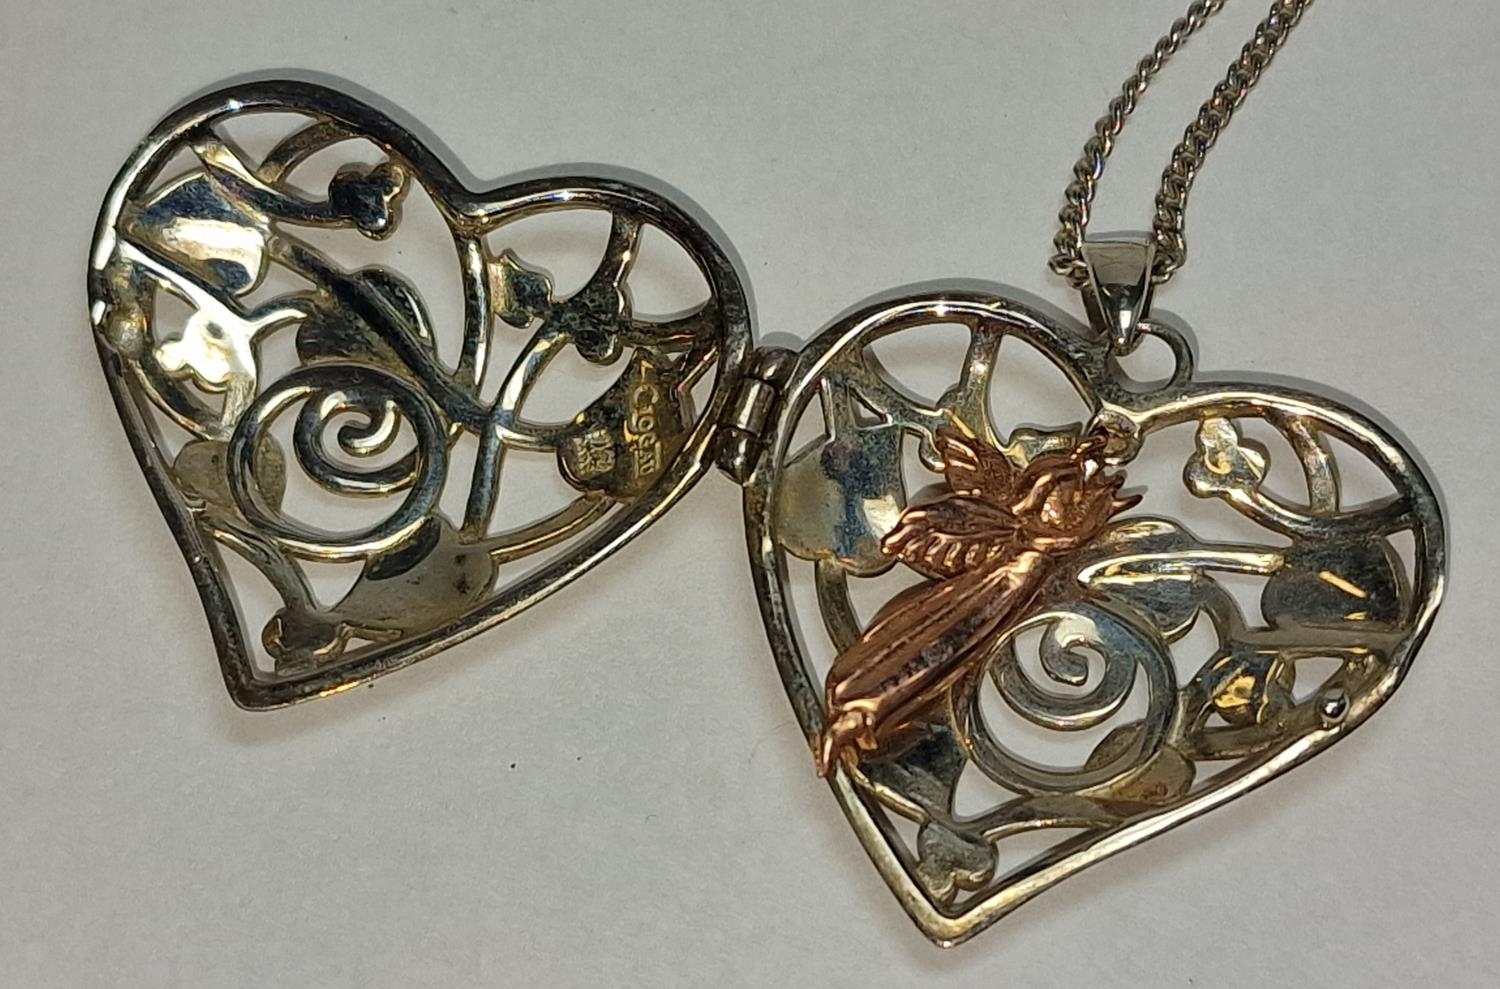 Clogau Welsh gold angel inside silver locket and chain. - Image 3 of 4